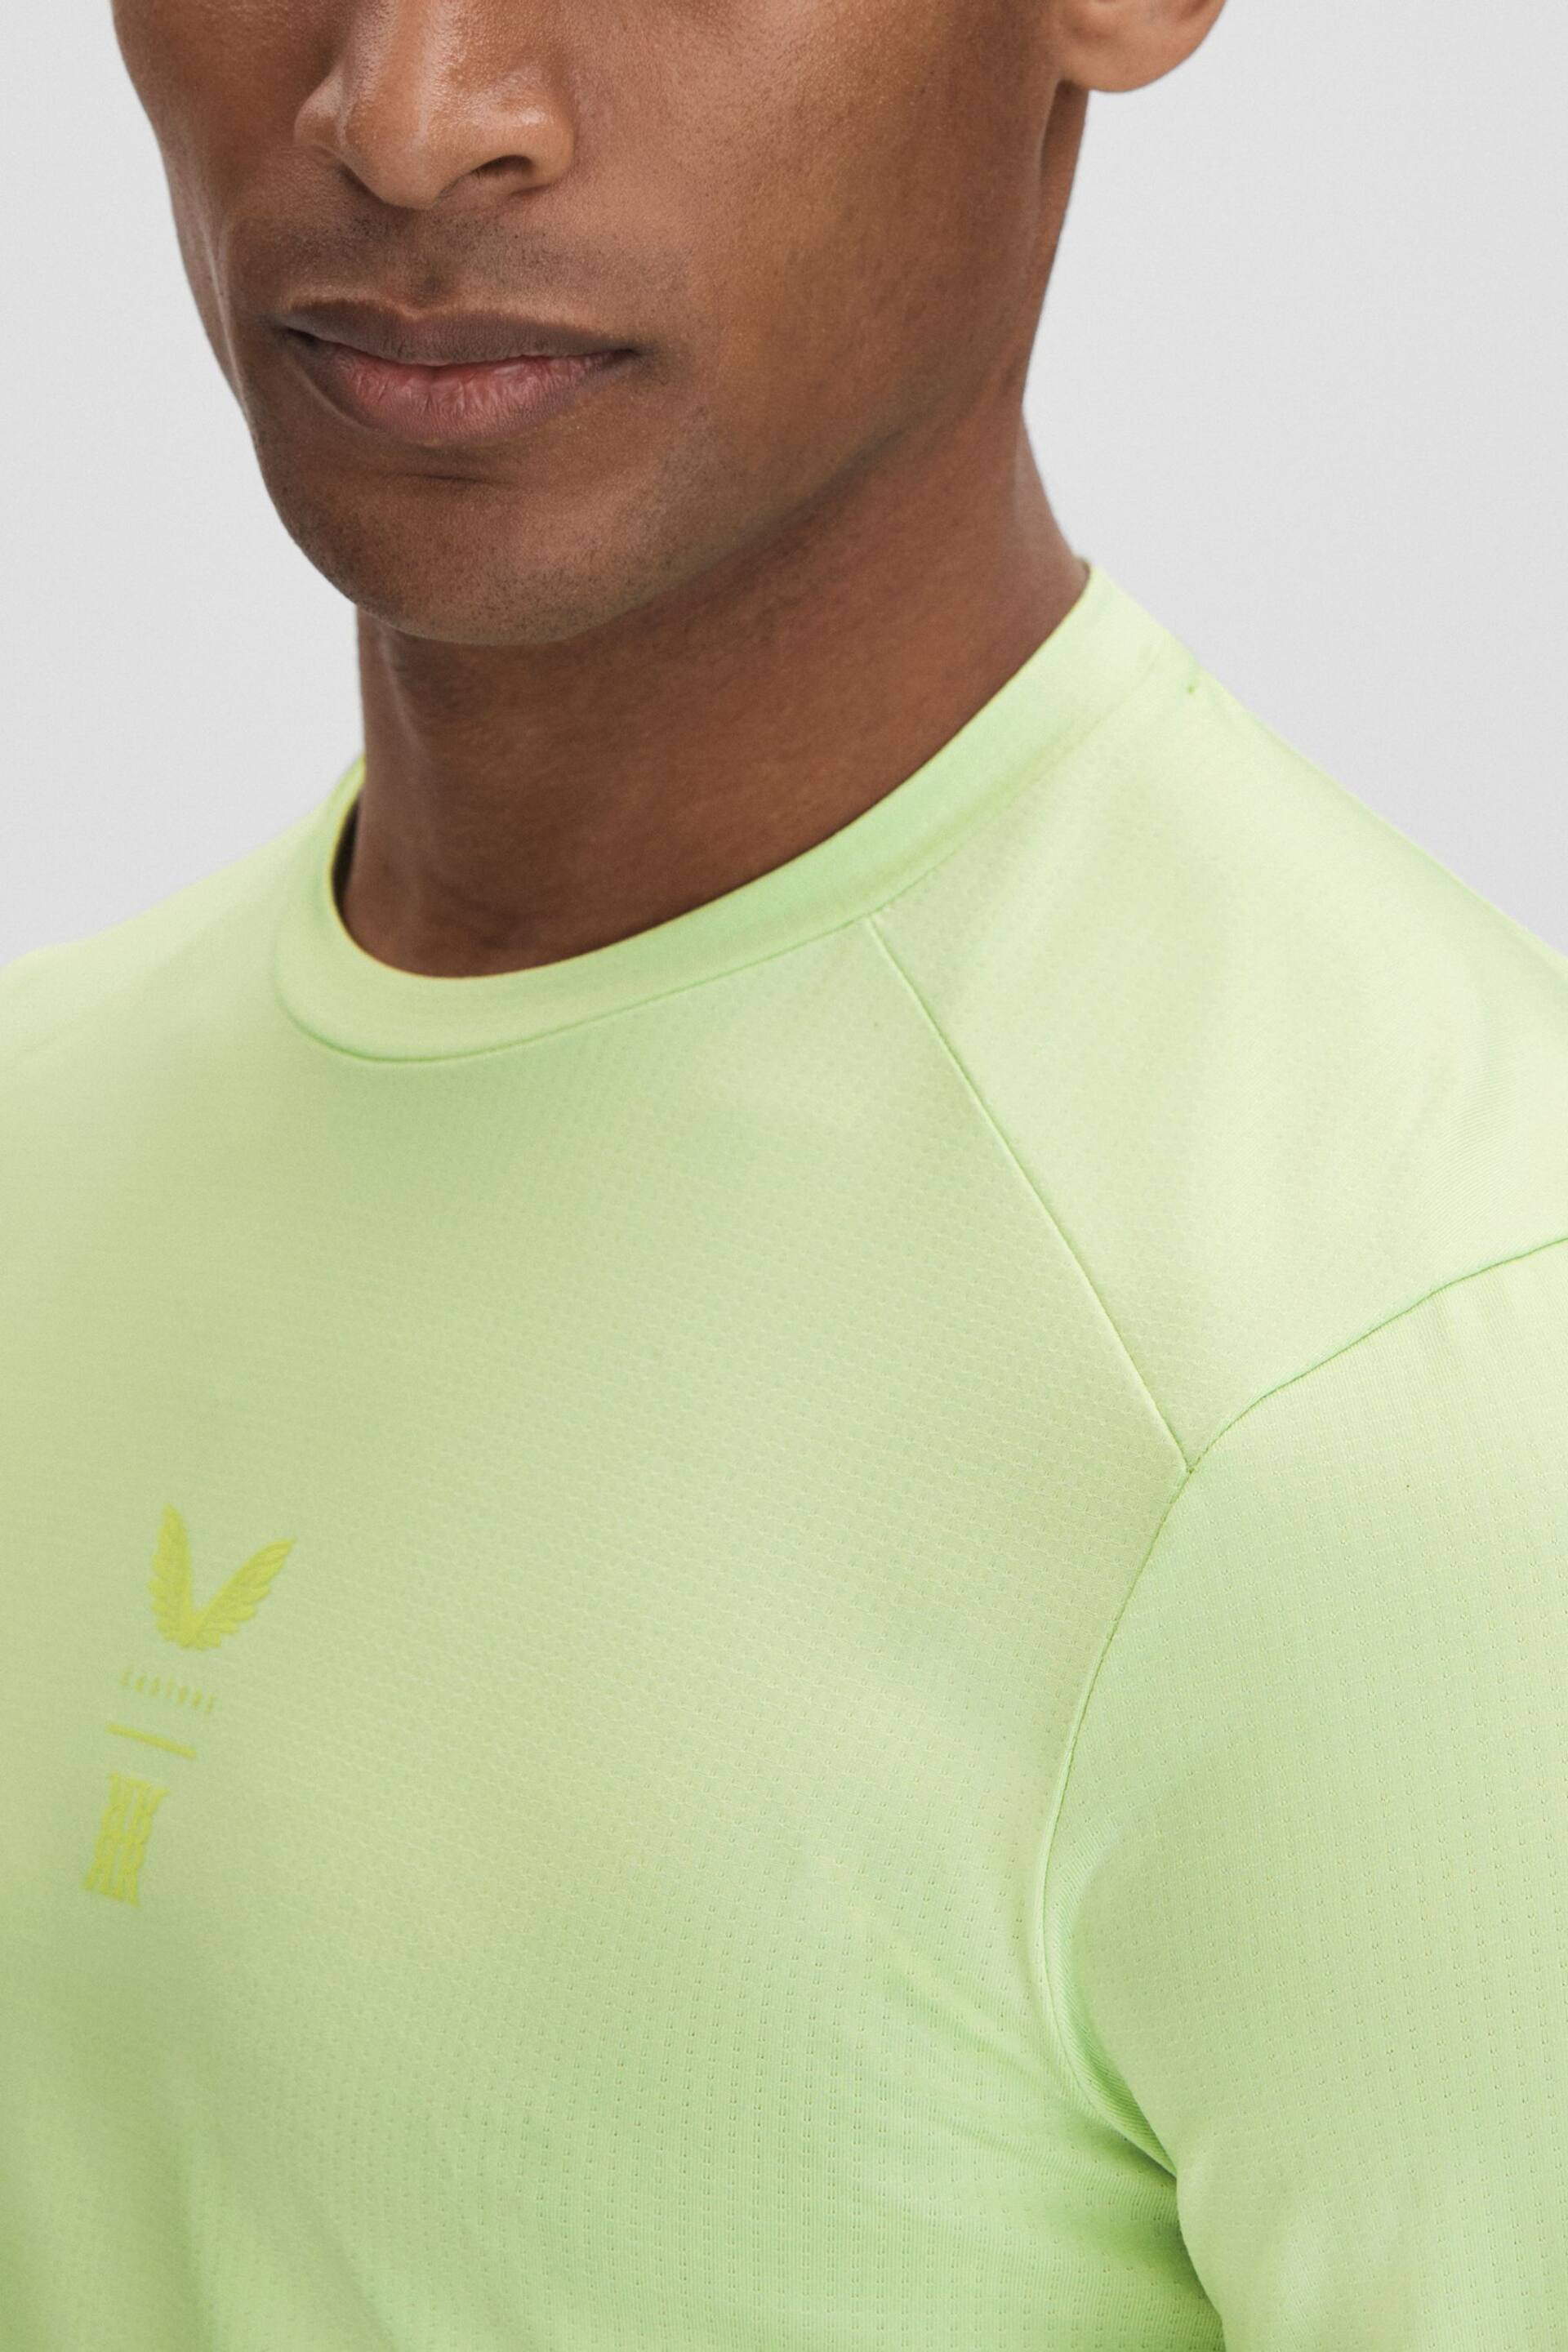 Reiss Iced Citrus Yellow Kash Castore Performance Long Sleeve Top - Image 4 of 9